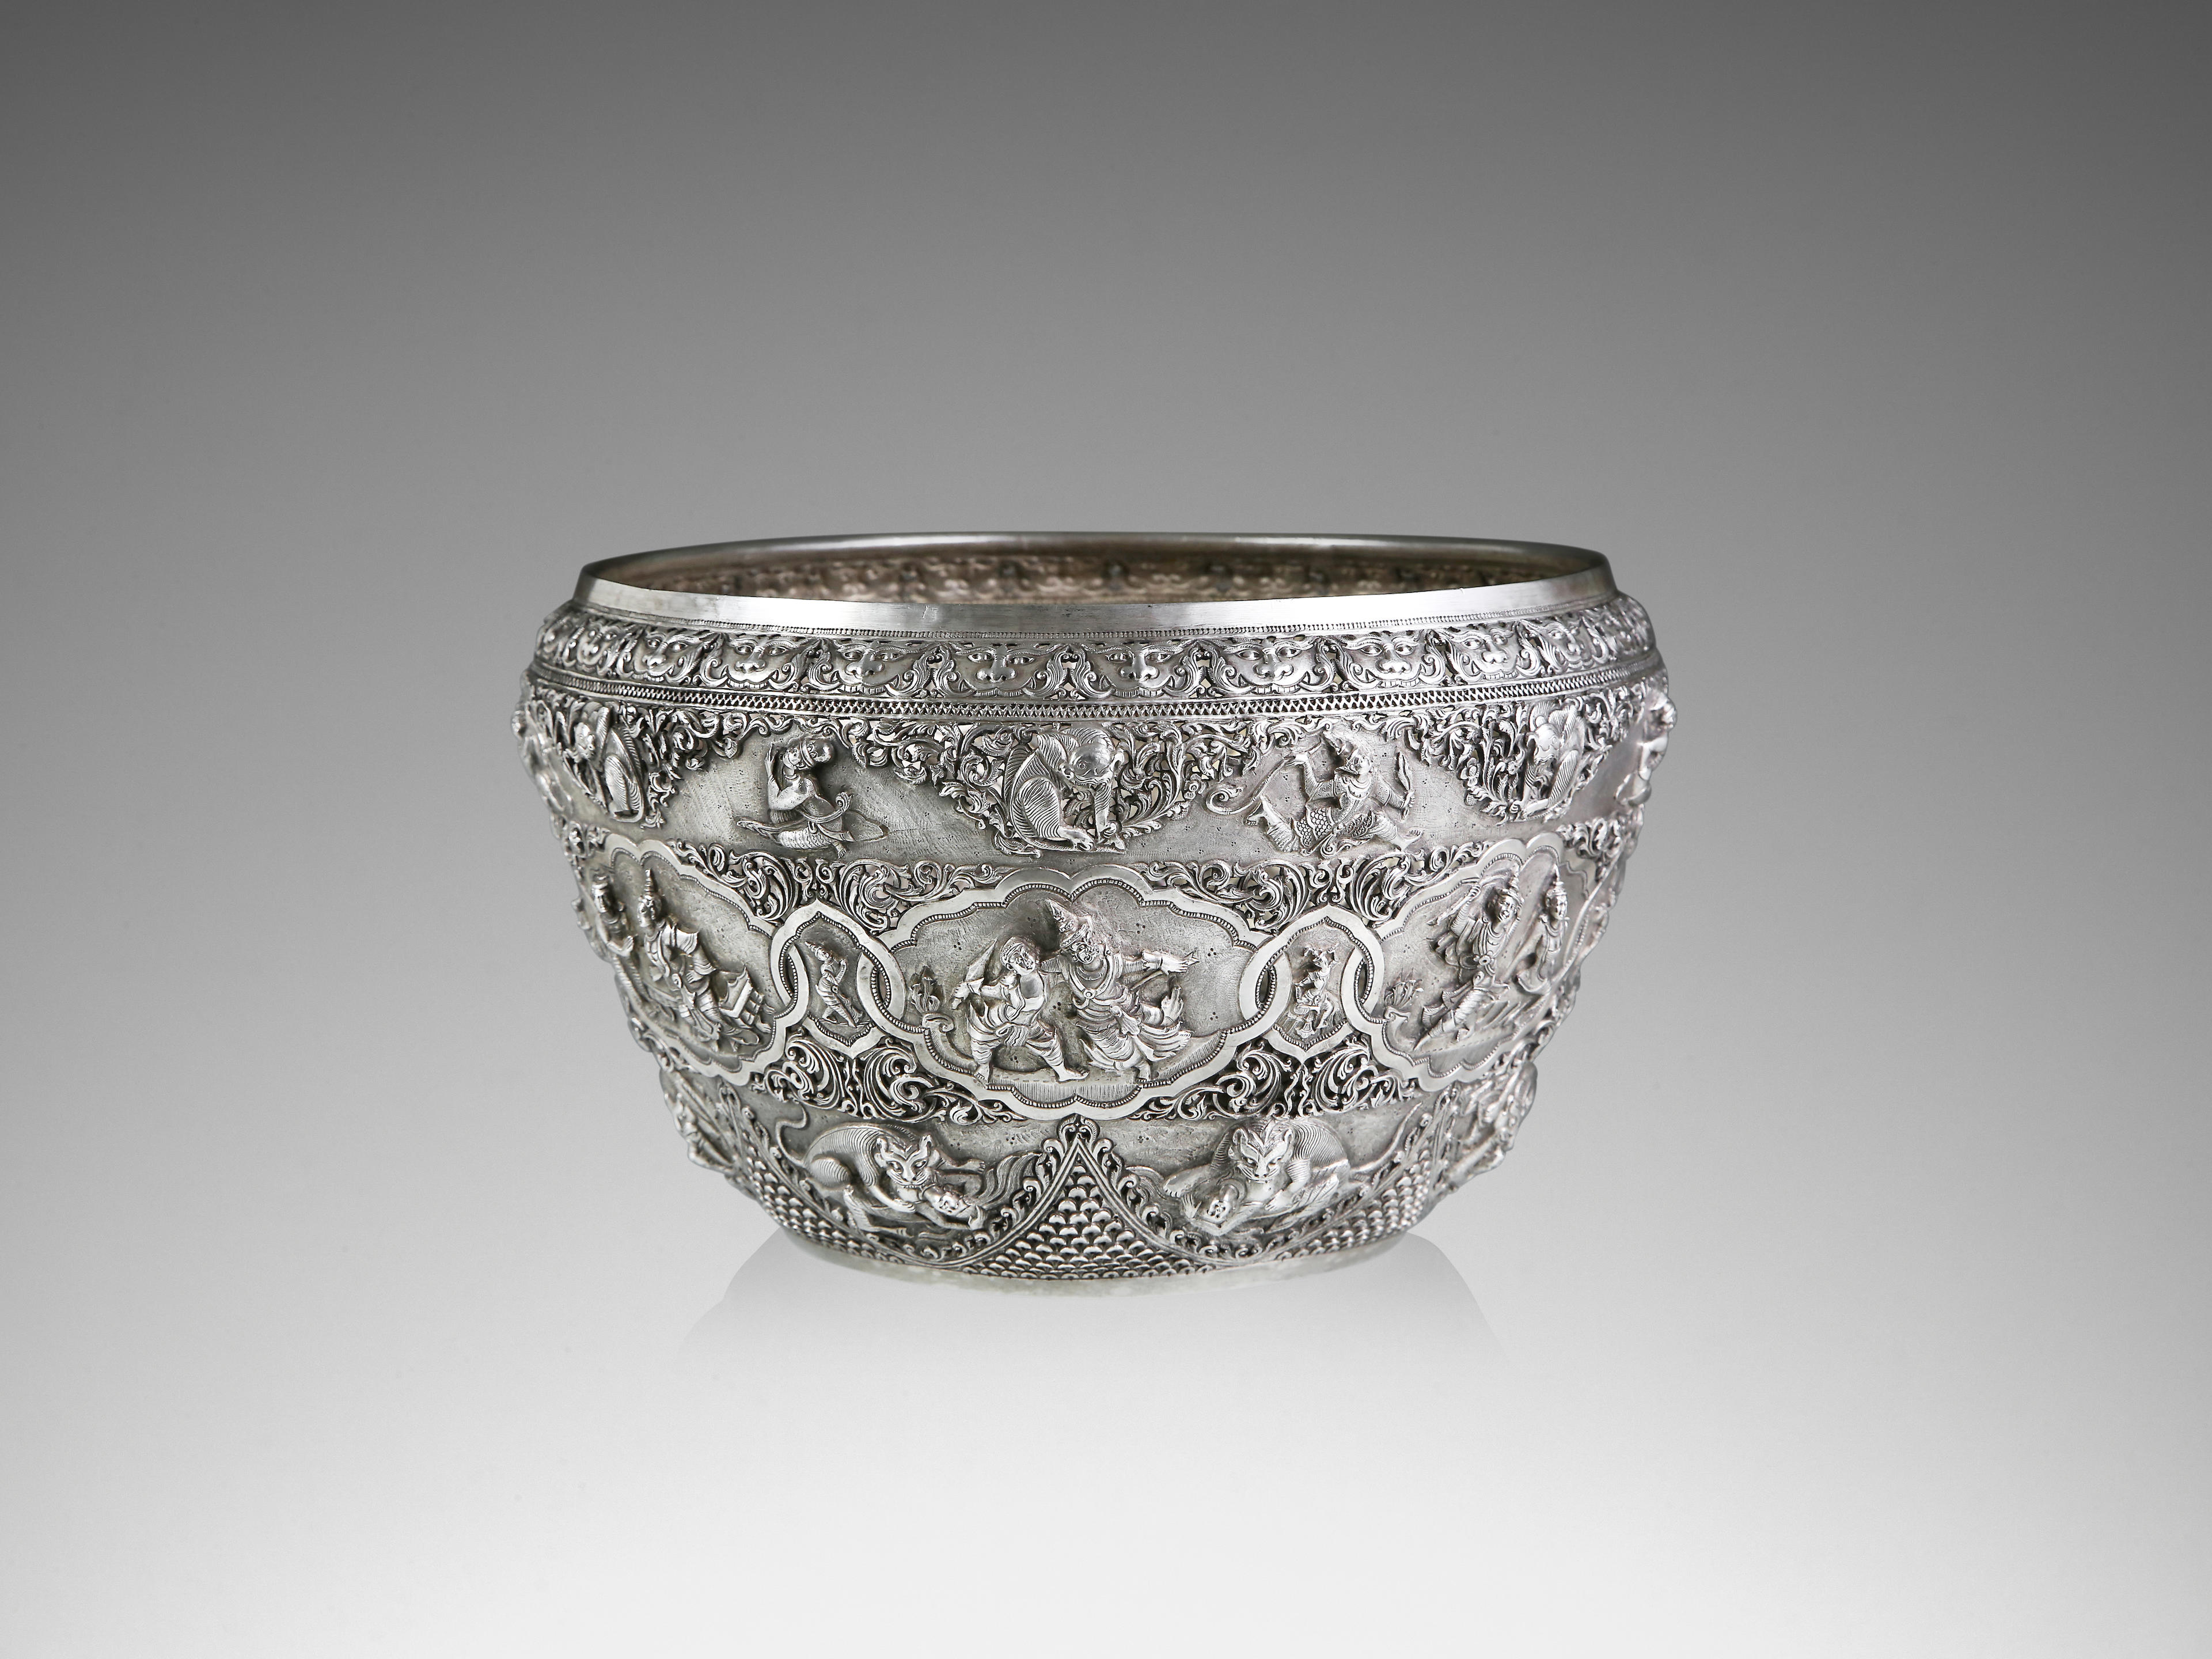 A SILVER OFFERING BOWL WITH SCENES OF THE RAMAYANA LOWER BURMA (MYANMAR), CIRCA 1915